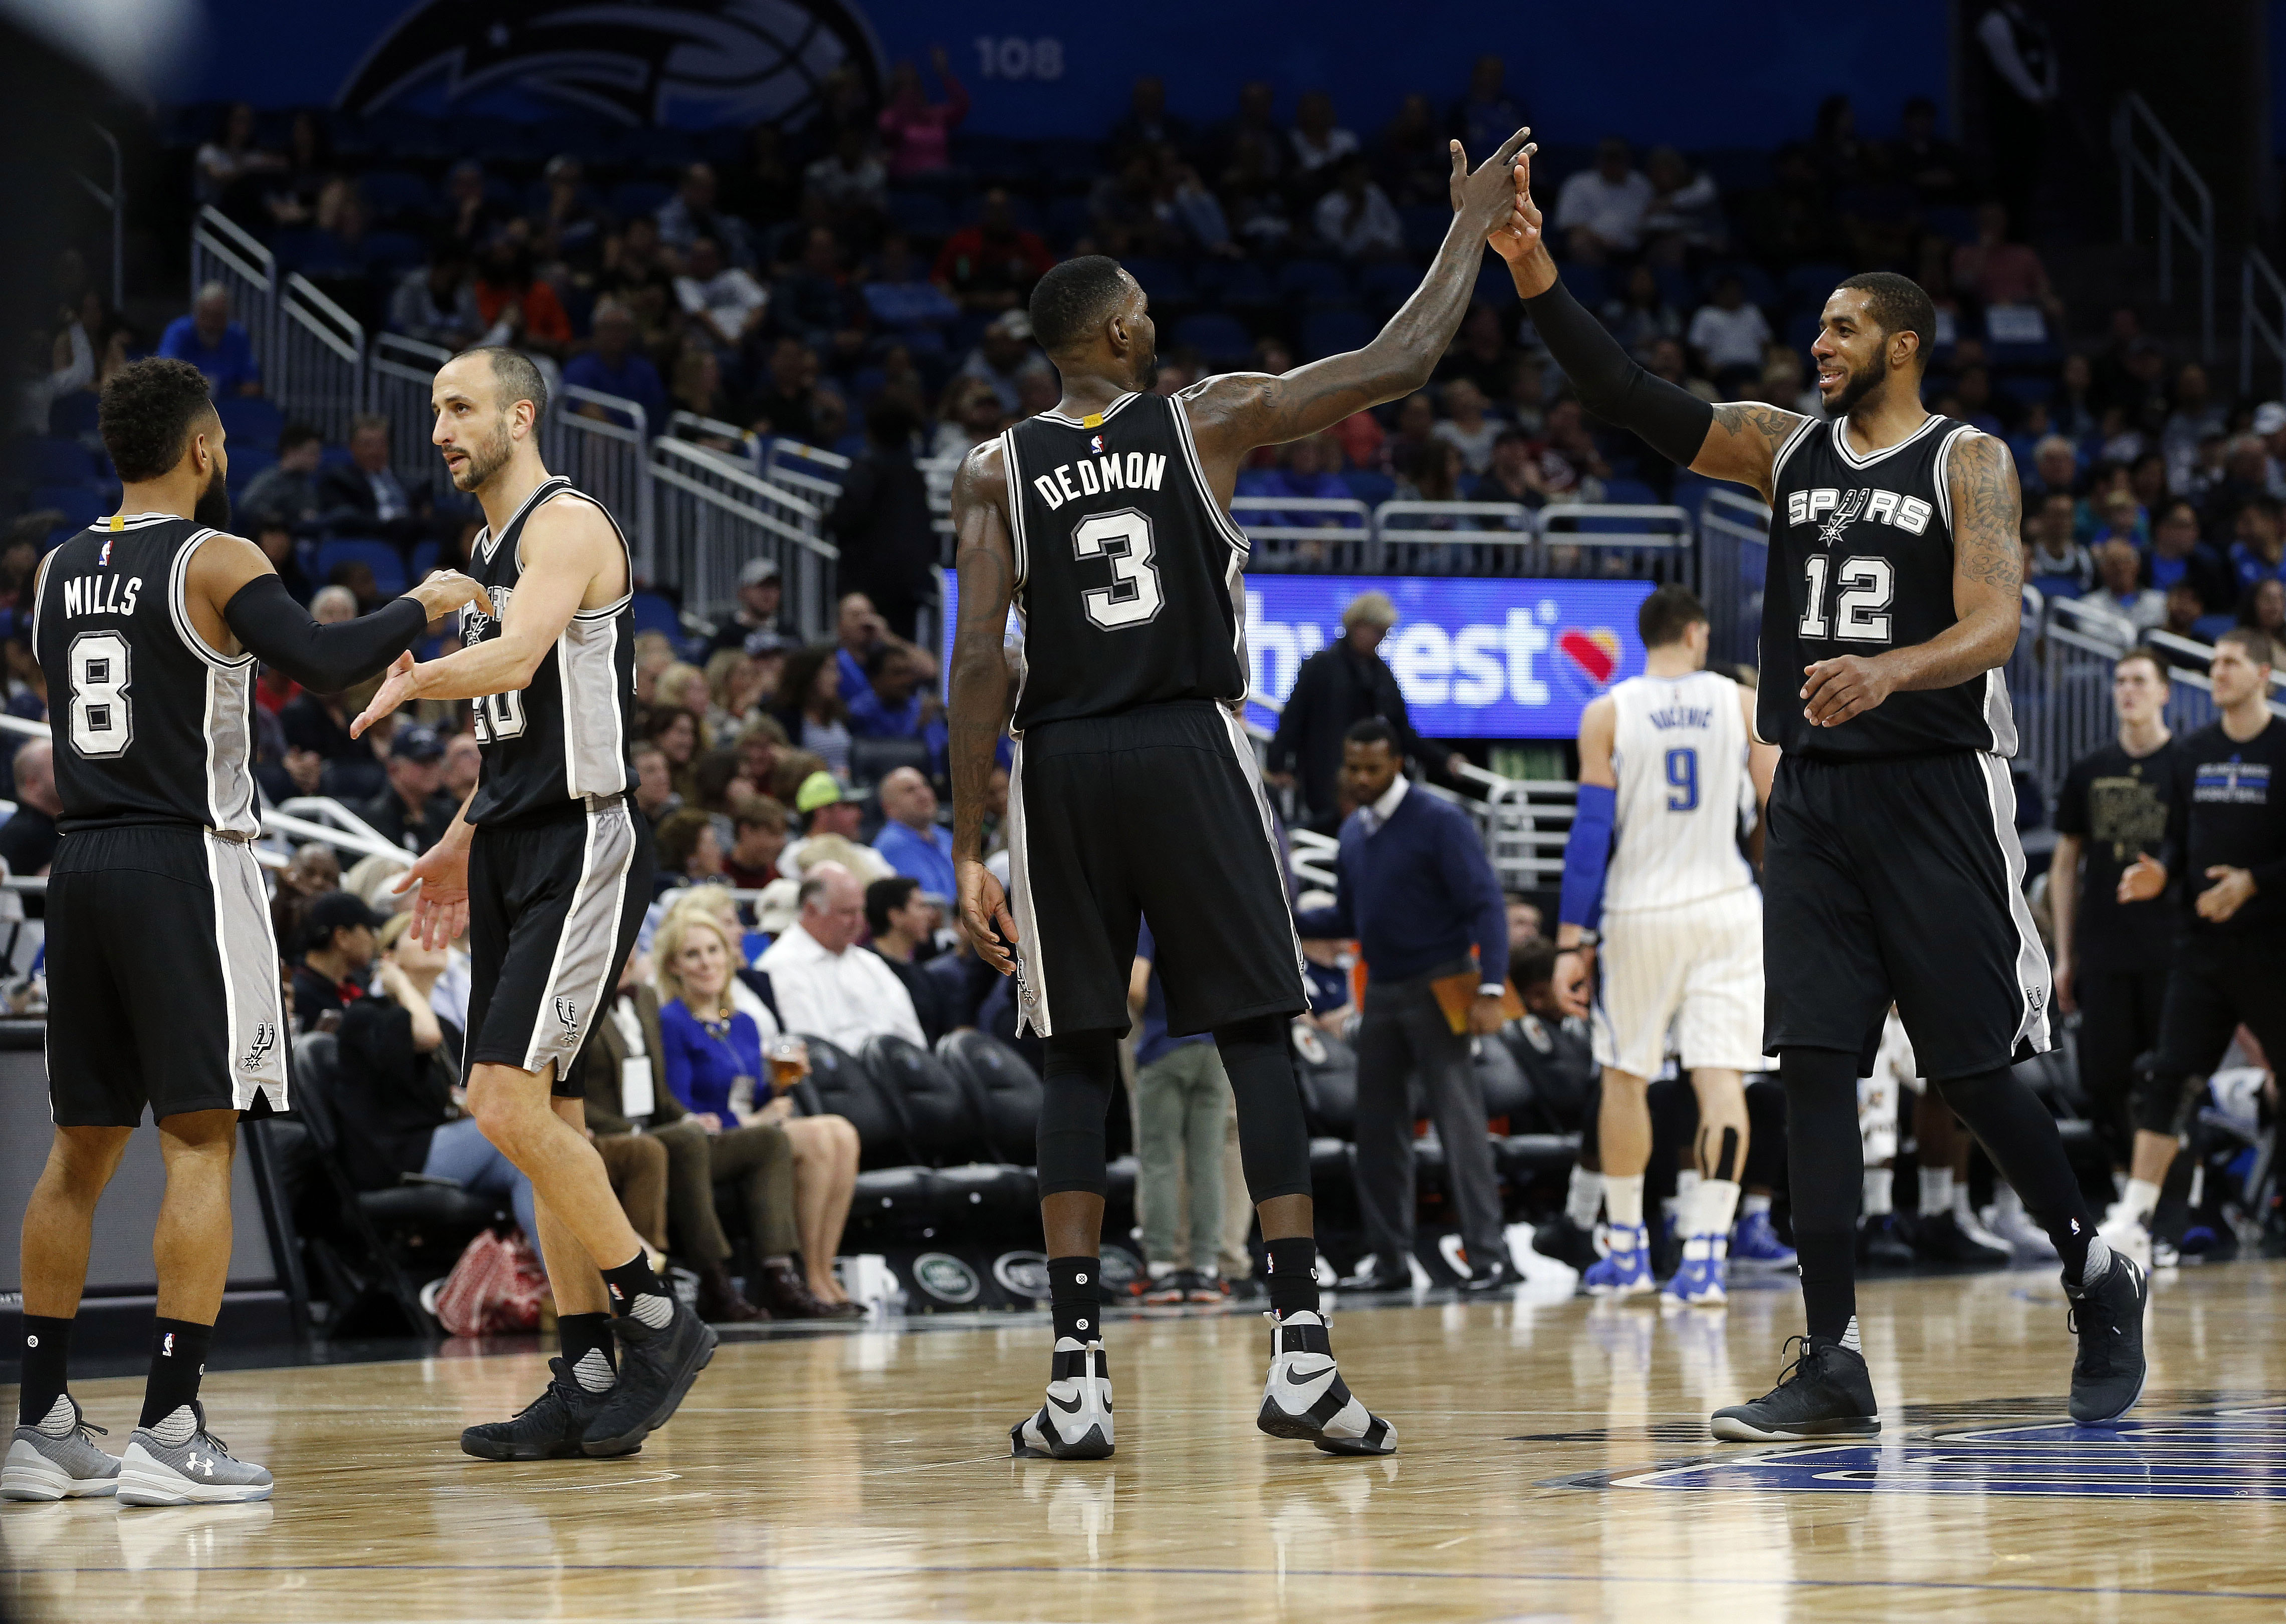 Report: The Spurs are acquiring Dewayne Dedmon and a second round